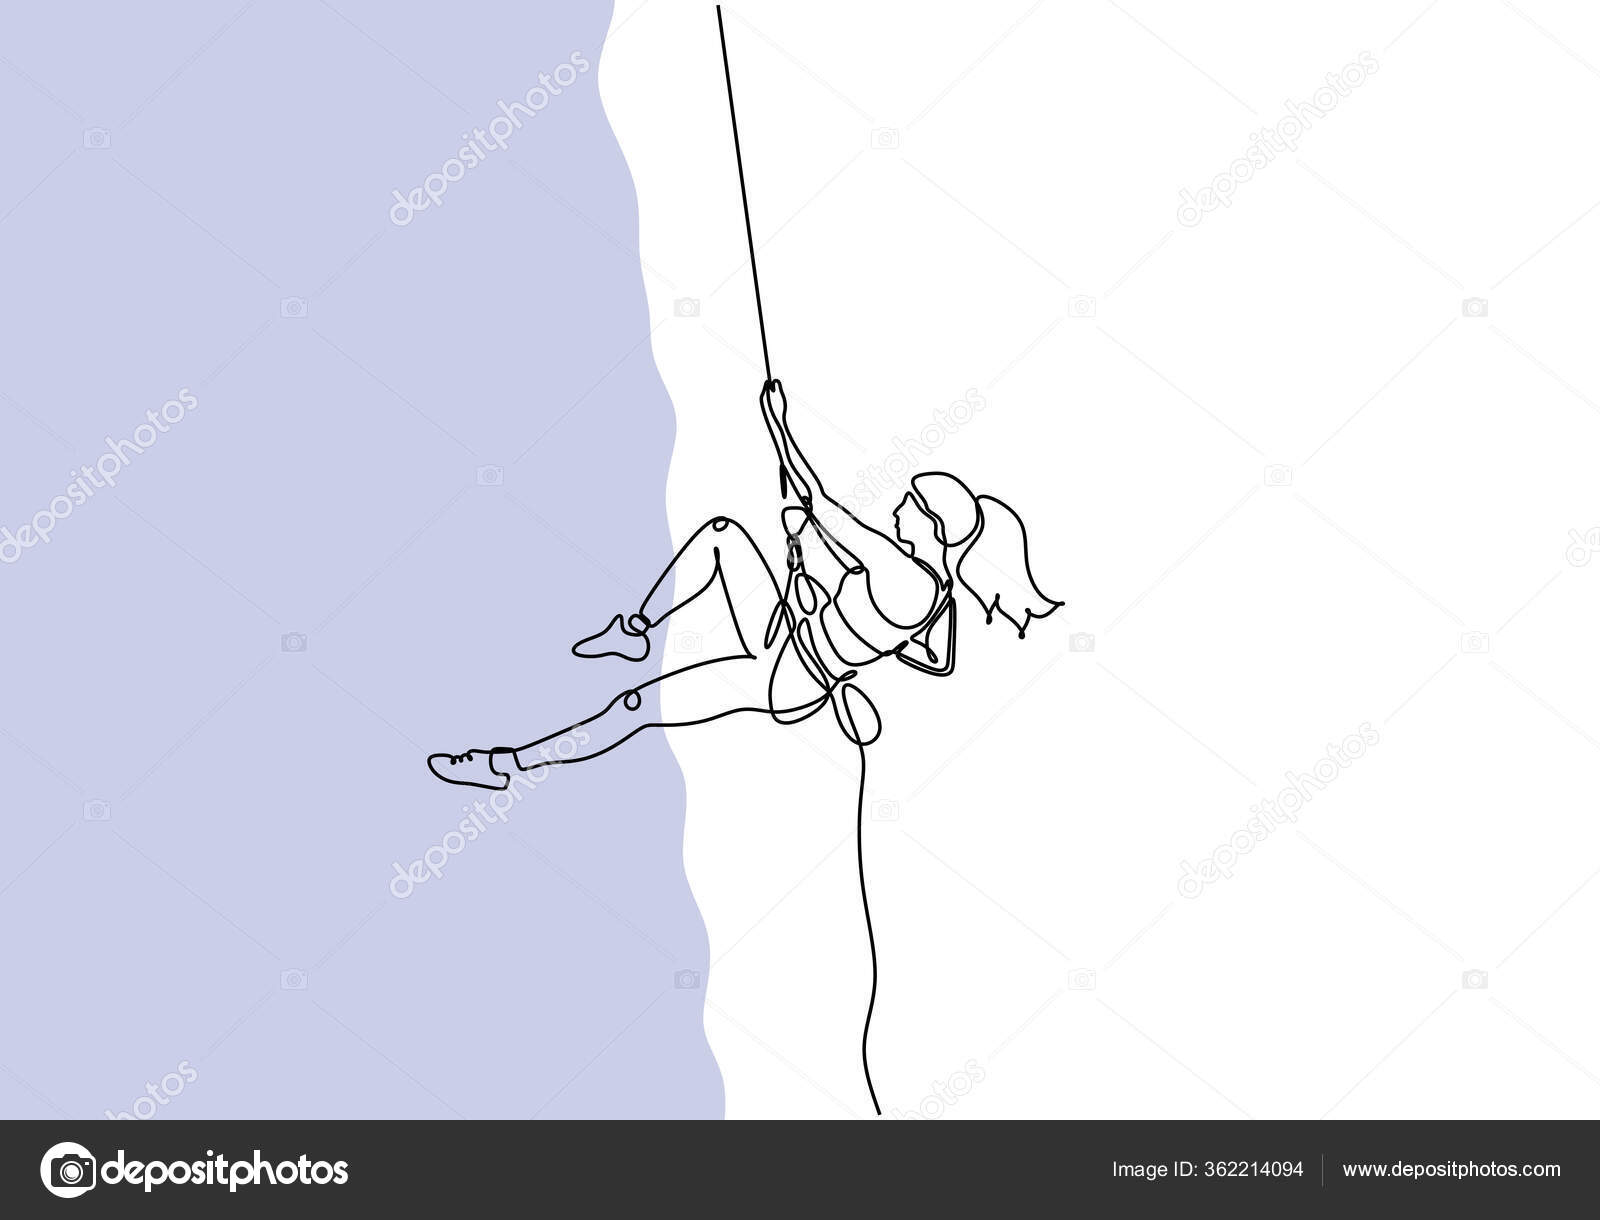 Extreme Sport One Line Drawing Girl Doing Rock Climbing Rope Stock Vector  by ©ngupakarti 362214094